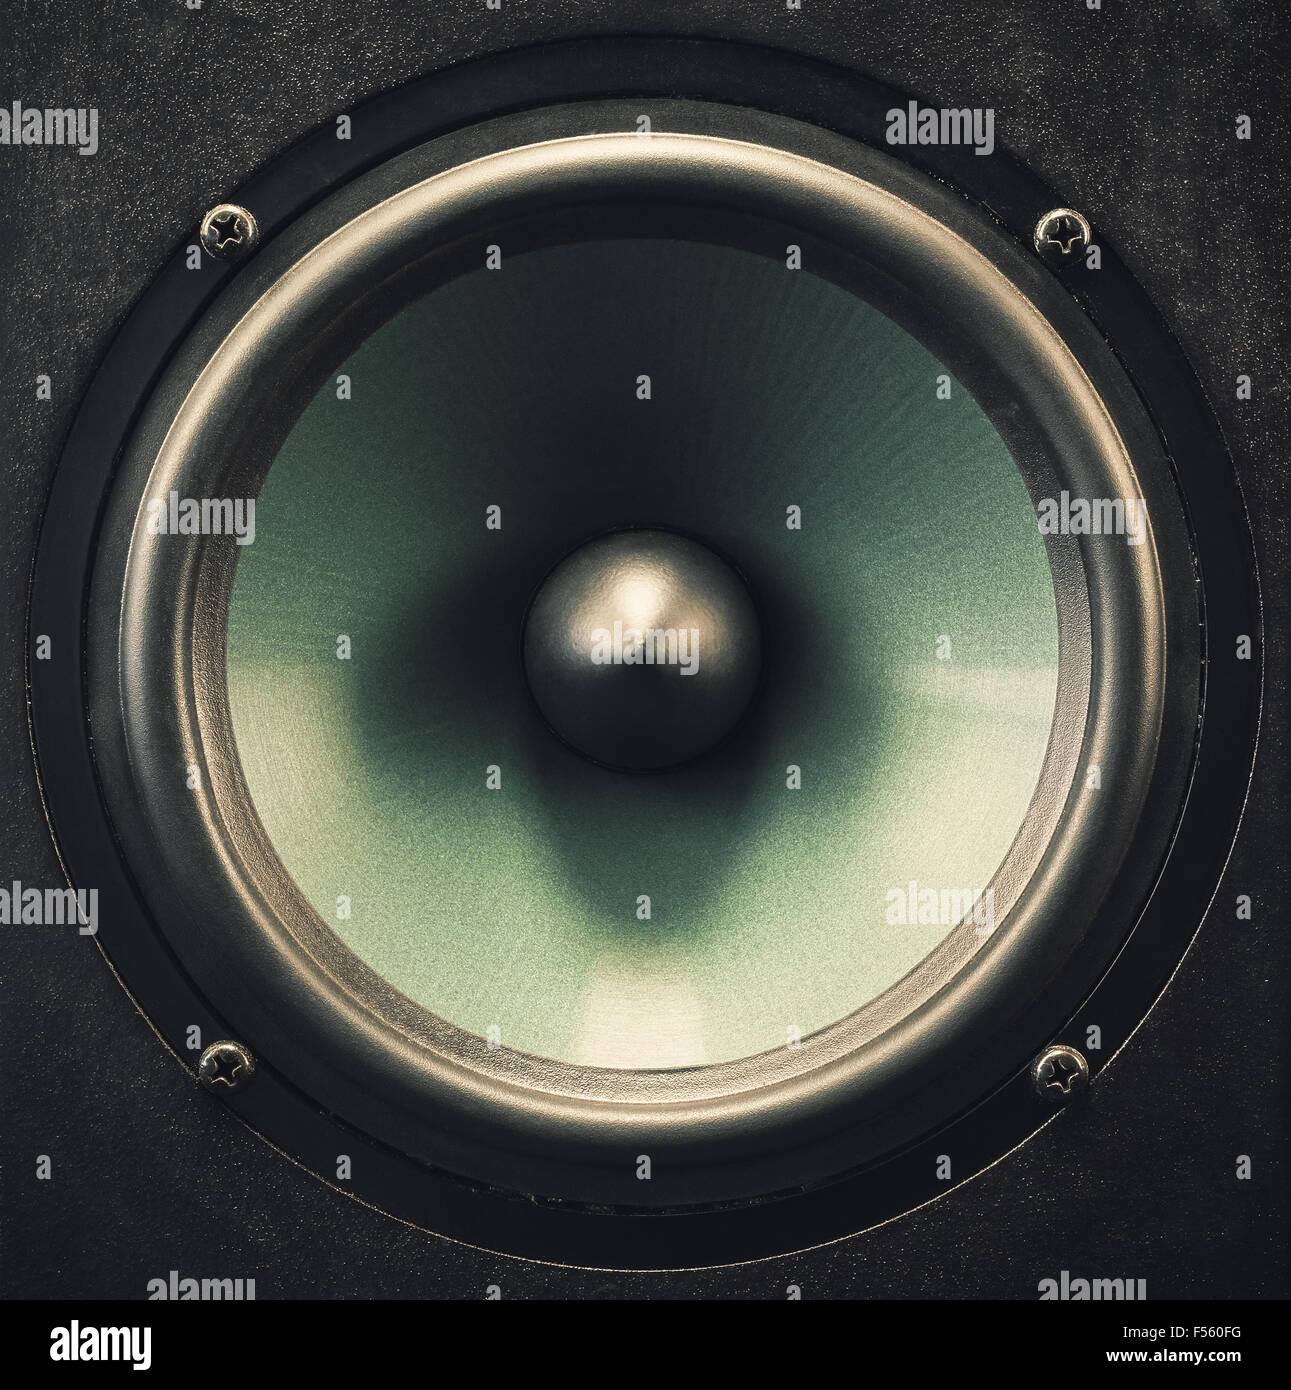 Metallic material of a woofer speaker, closeup details and of a membrane. Stock Photo